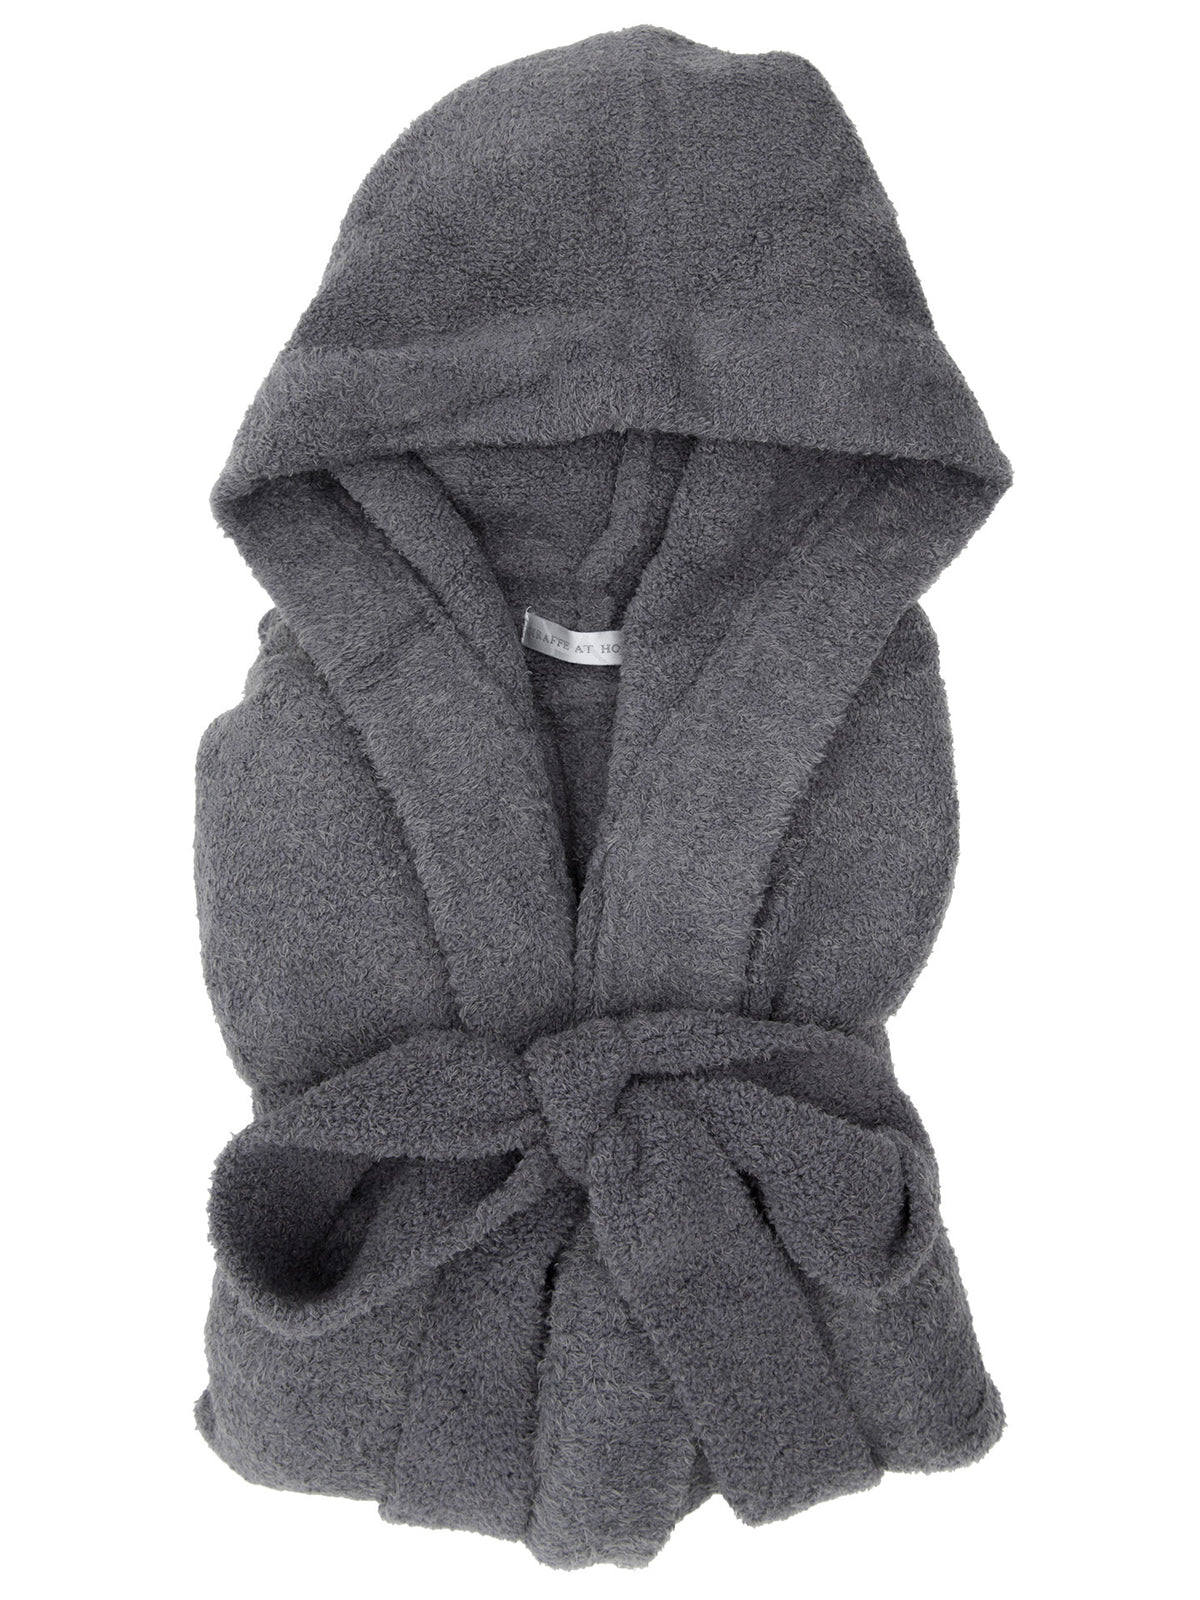 Dolce™ Hoodie Robe